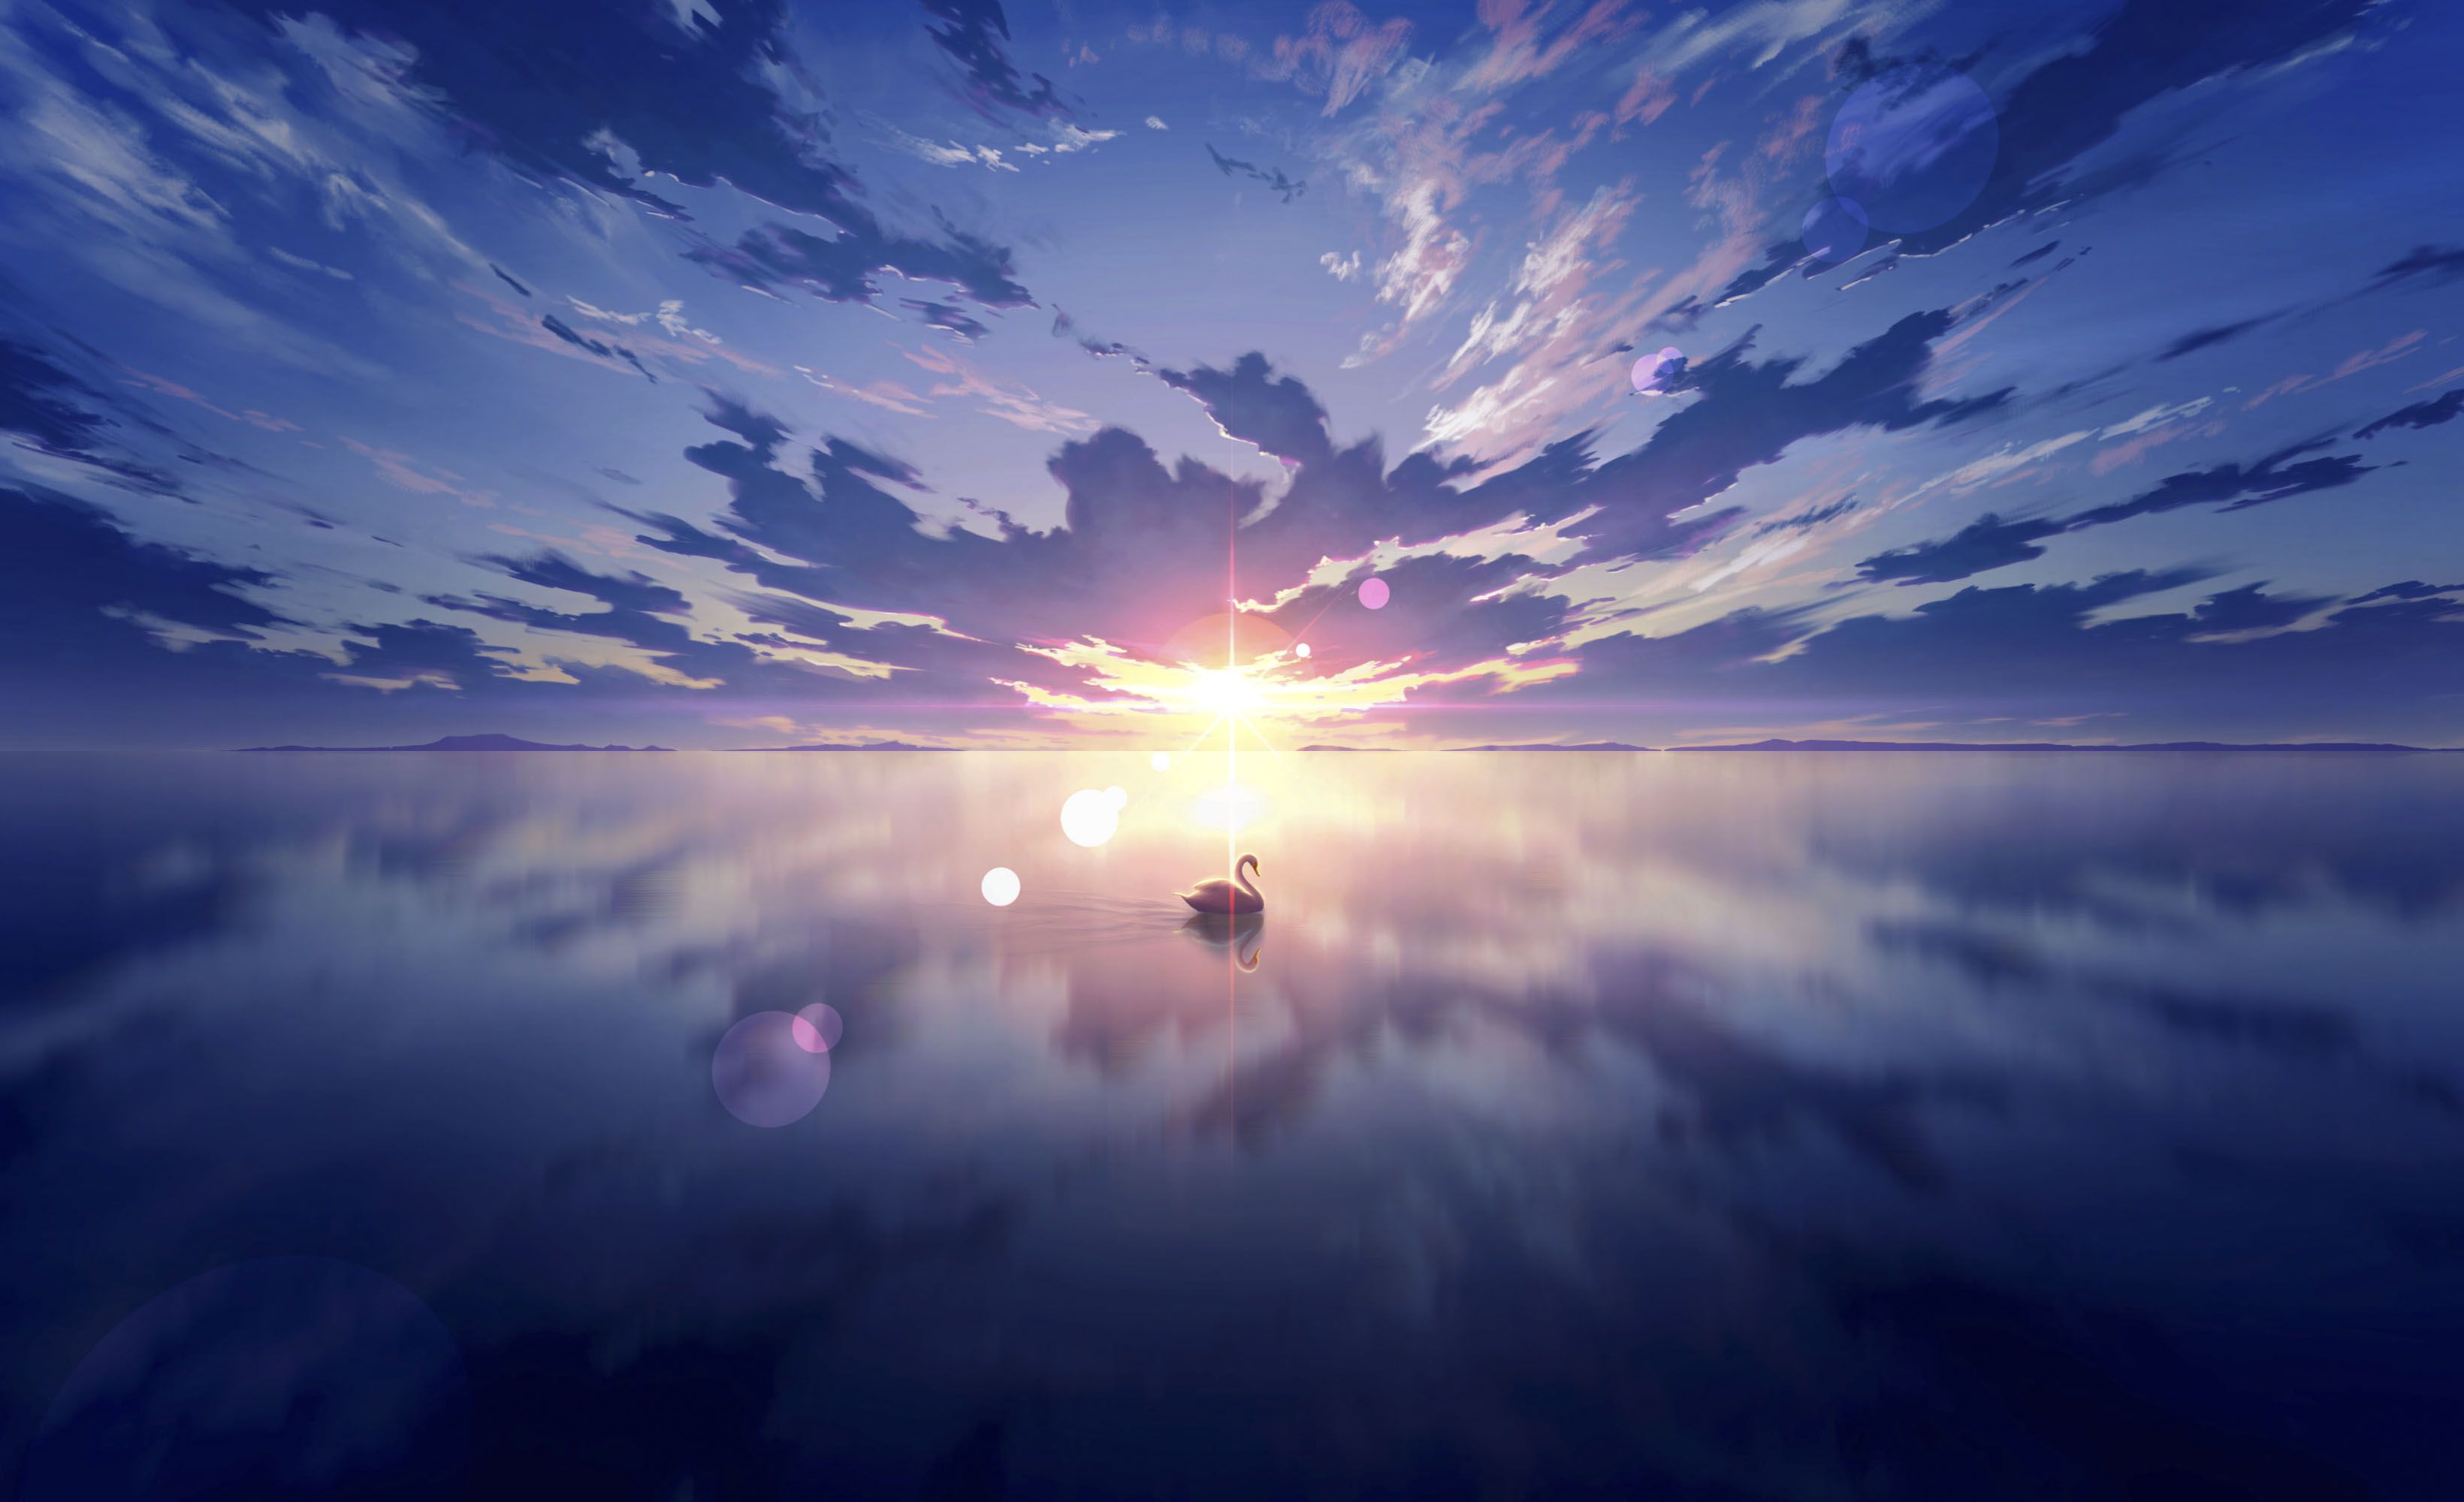 anime, #anime sky, #sky, #skyscape, #lake, #swan, #reflection, #shining, #sunlight, #nature, #water, #sea, #landscape, #clo. Skyscape, Wallpaper, Sunset painting